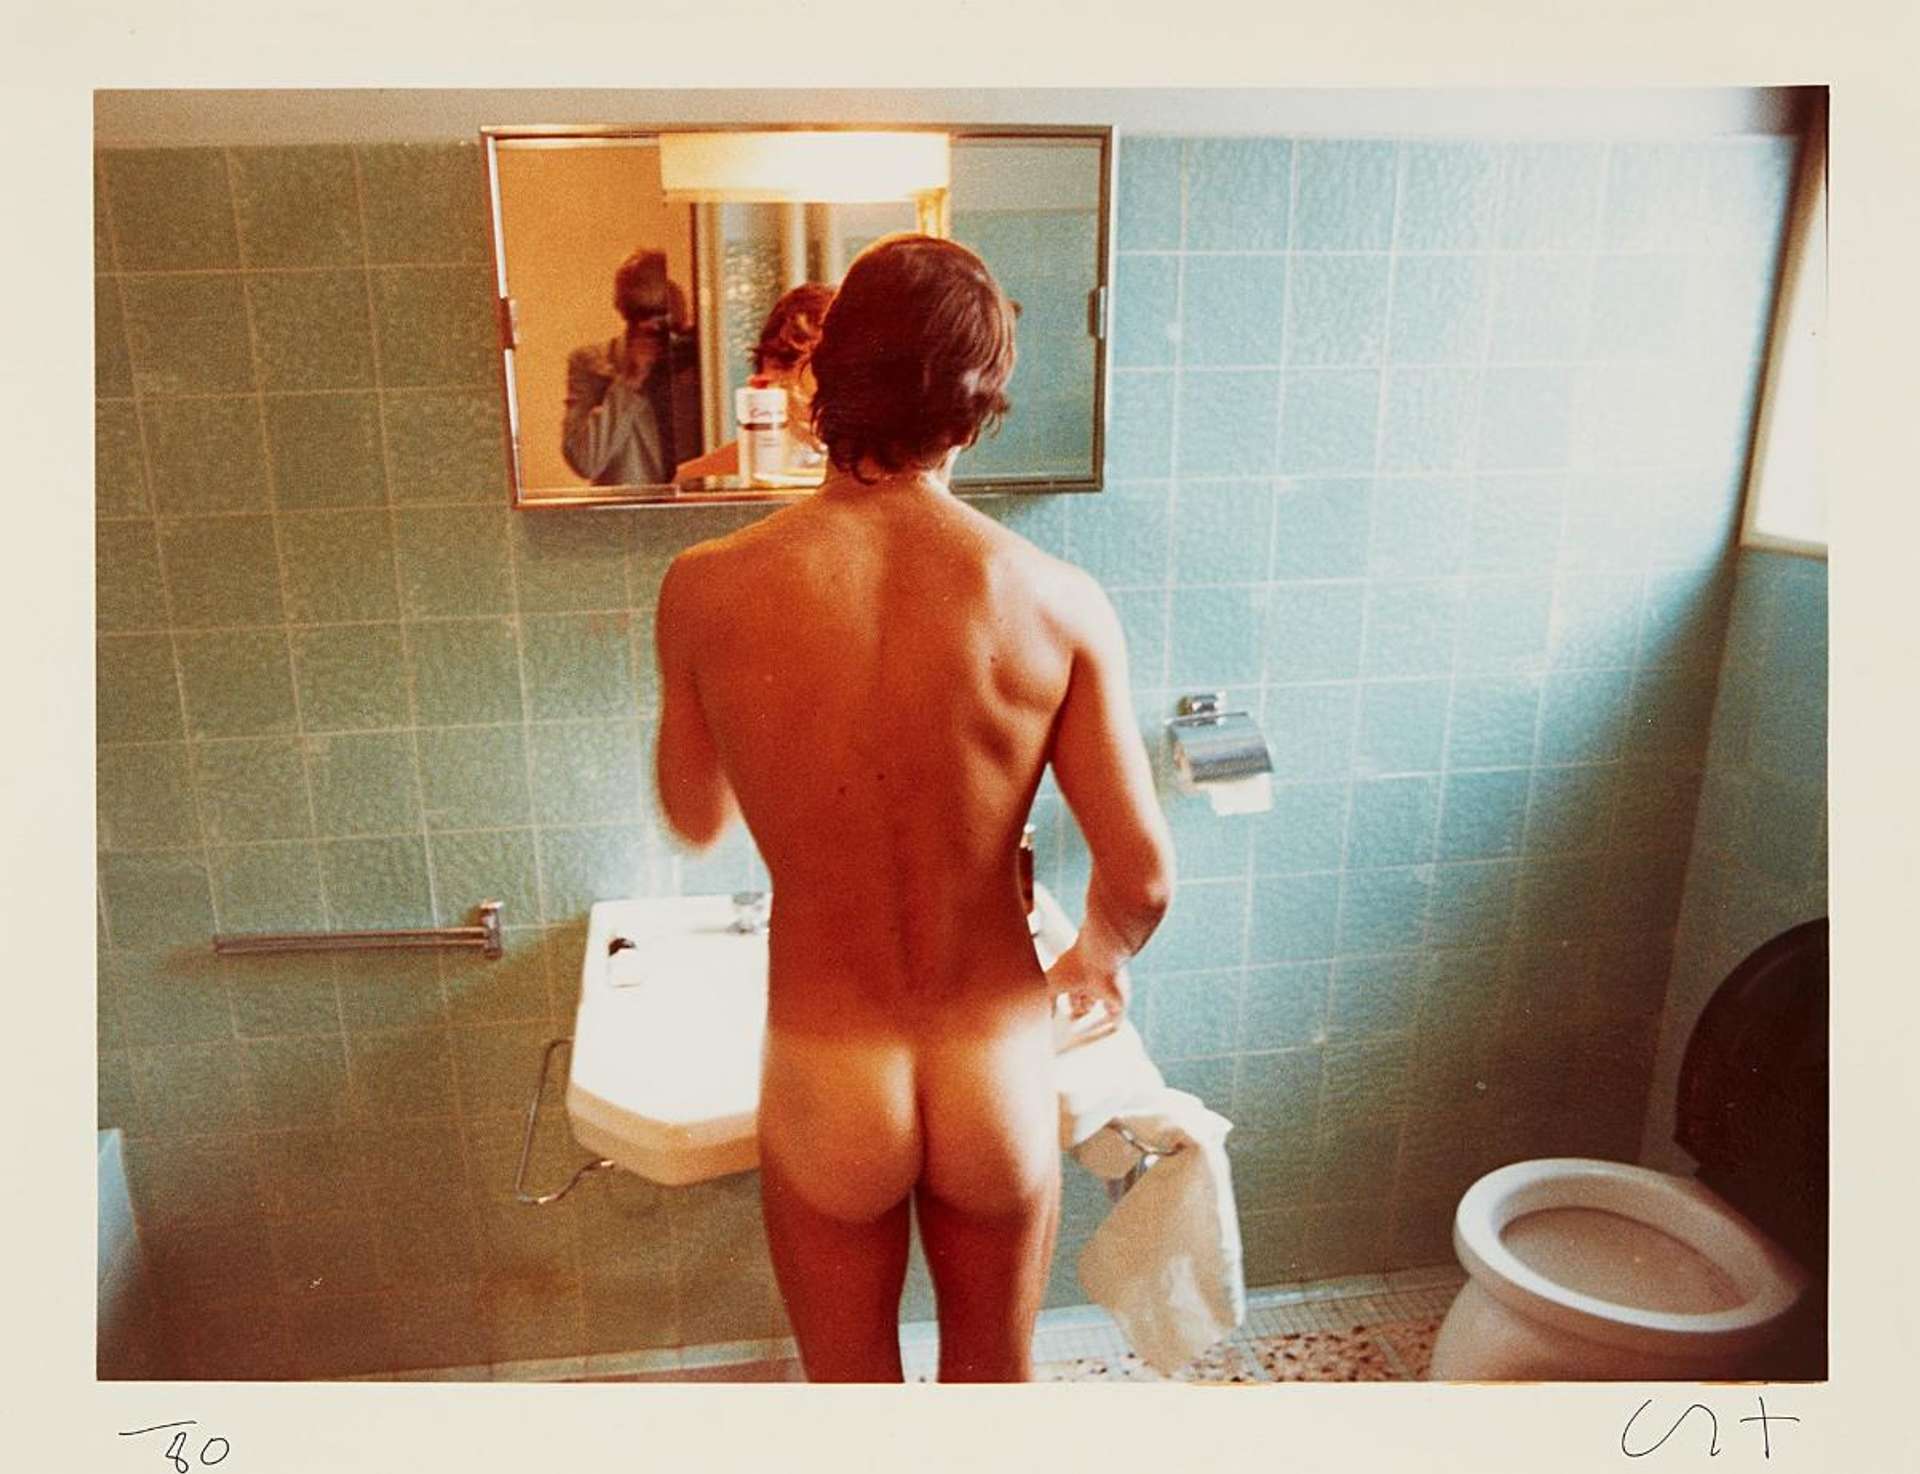 David Hockney’s Peter Washing, Belgrade, September. A digital print of a nude man standing in front of a mirror inside his blue, tiled bathroom. David Hockney is seen in the reflection of the mirror taking the photograph.